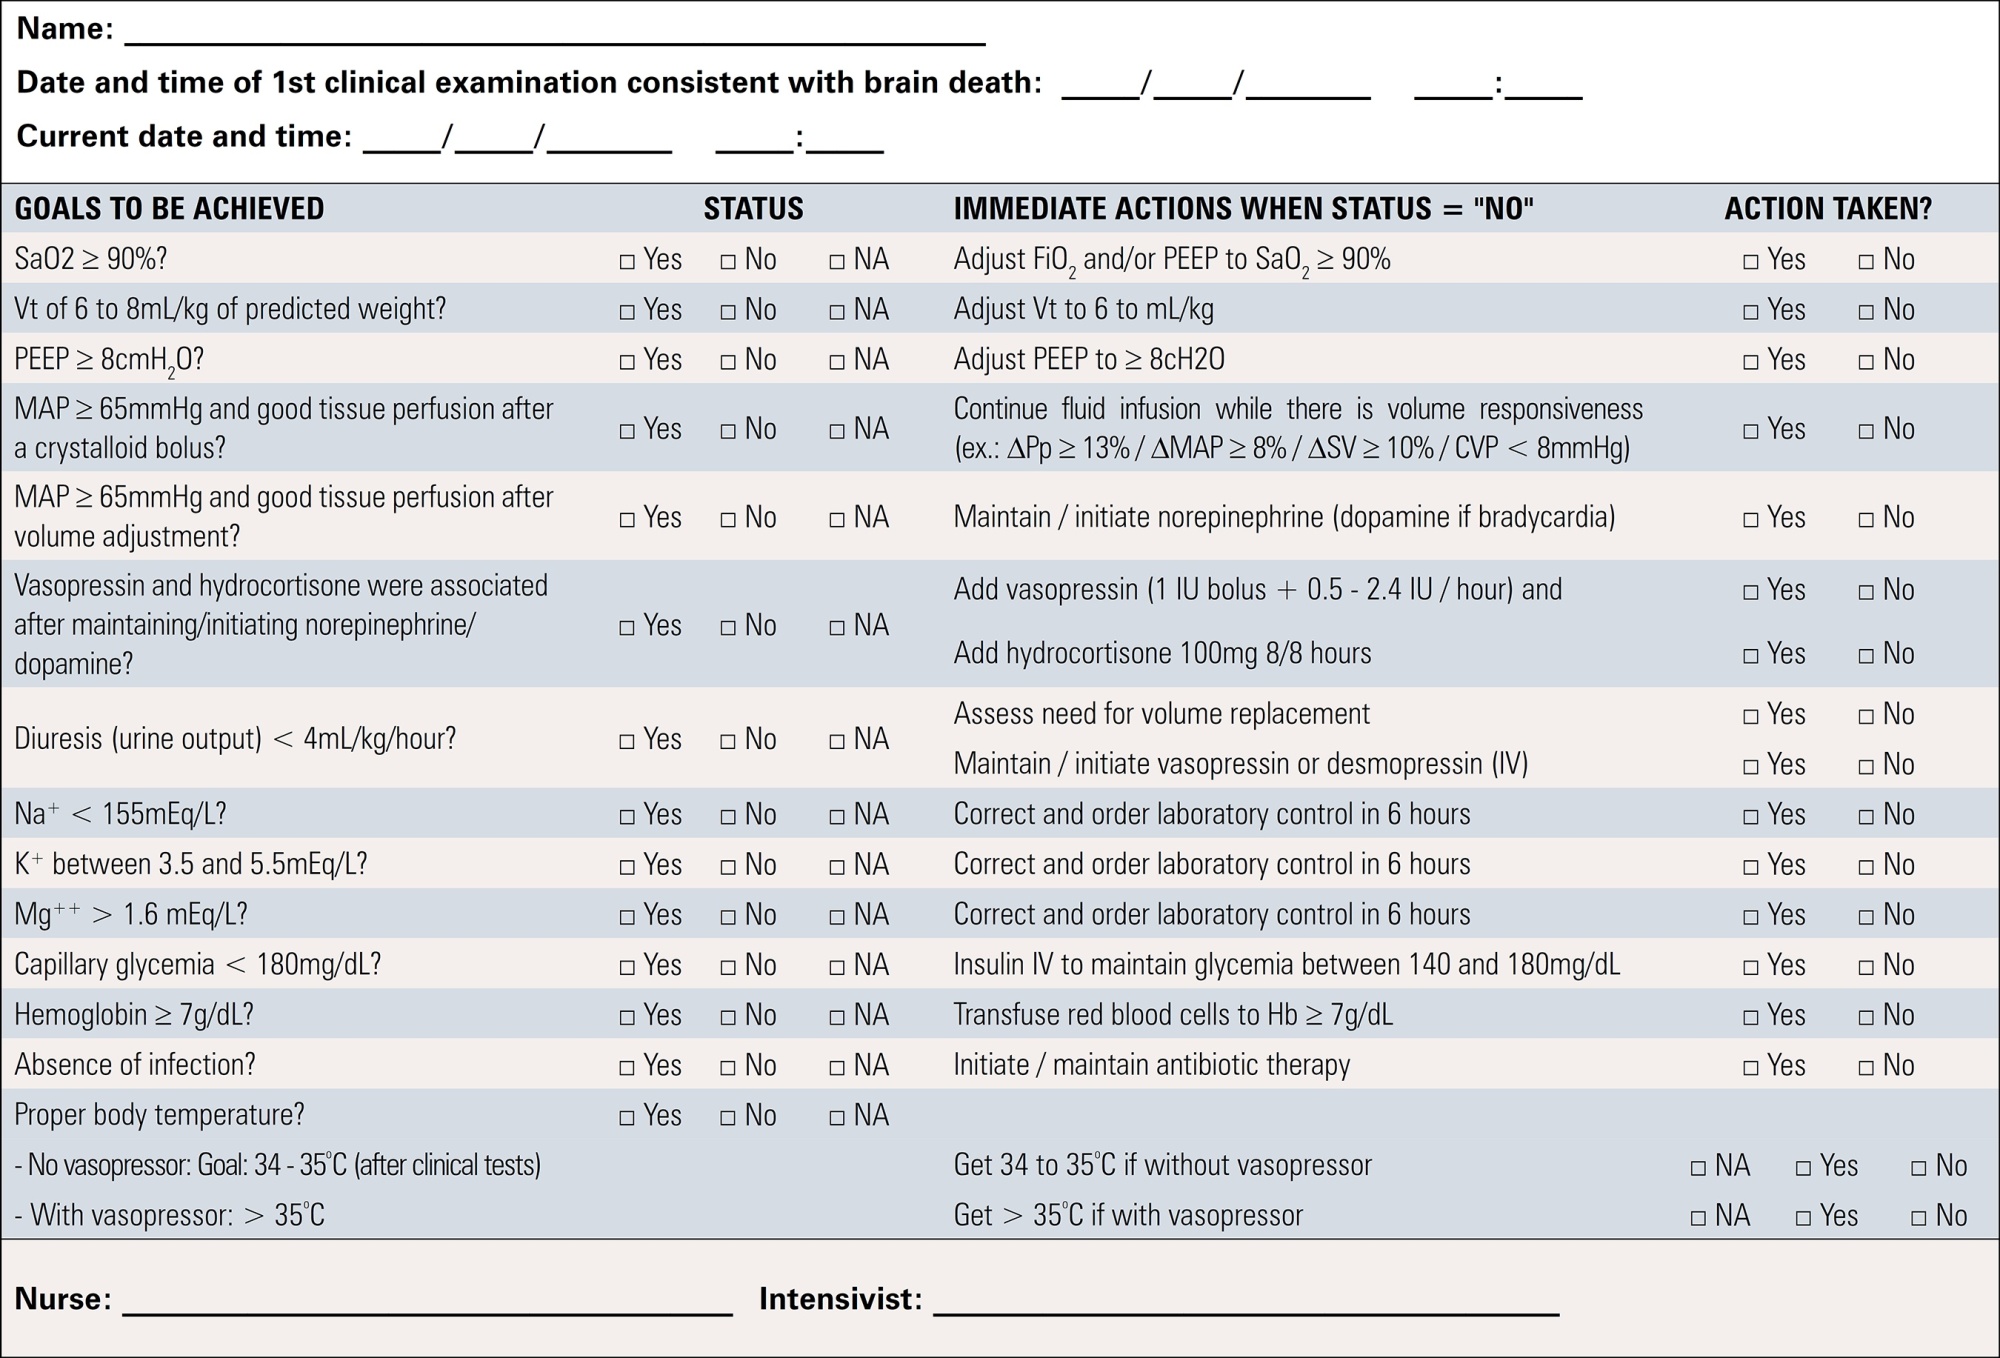 Brazilian guidelines for the management of brain-dead potential organ donors. The task force of the Associação de Medicina Intensiva Brasileira, Associação Brasileira de Transplantes de Órgãos, Brazilian Research in Critical Care Network, and the General Coordination of the National Transplant System